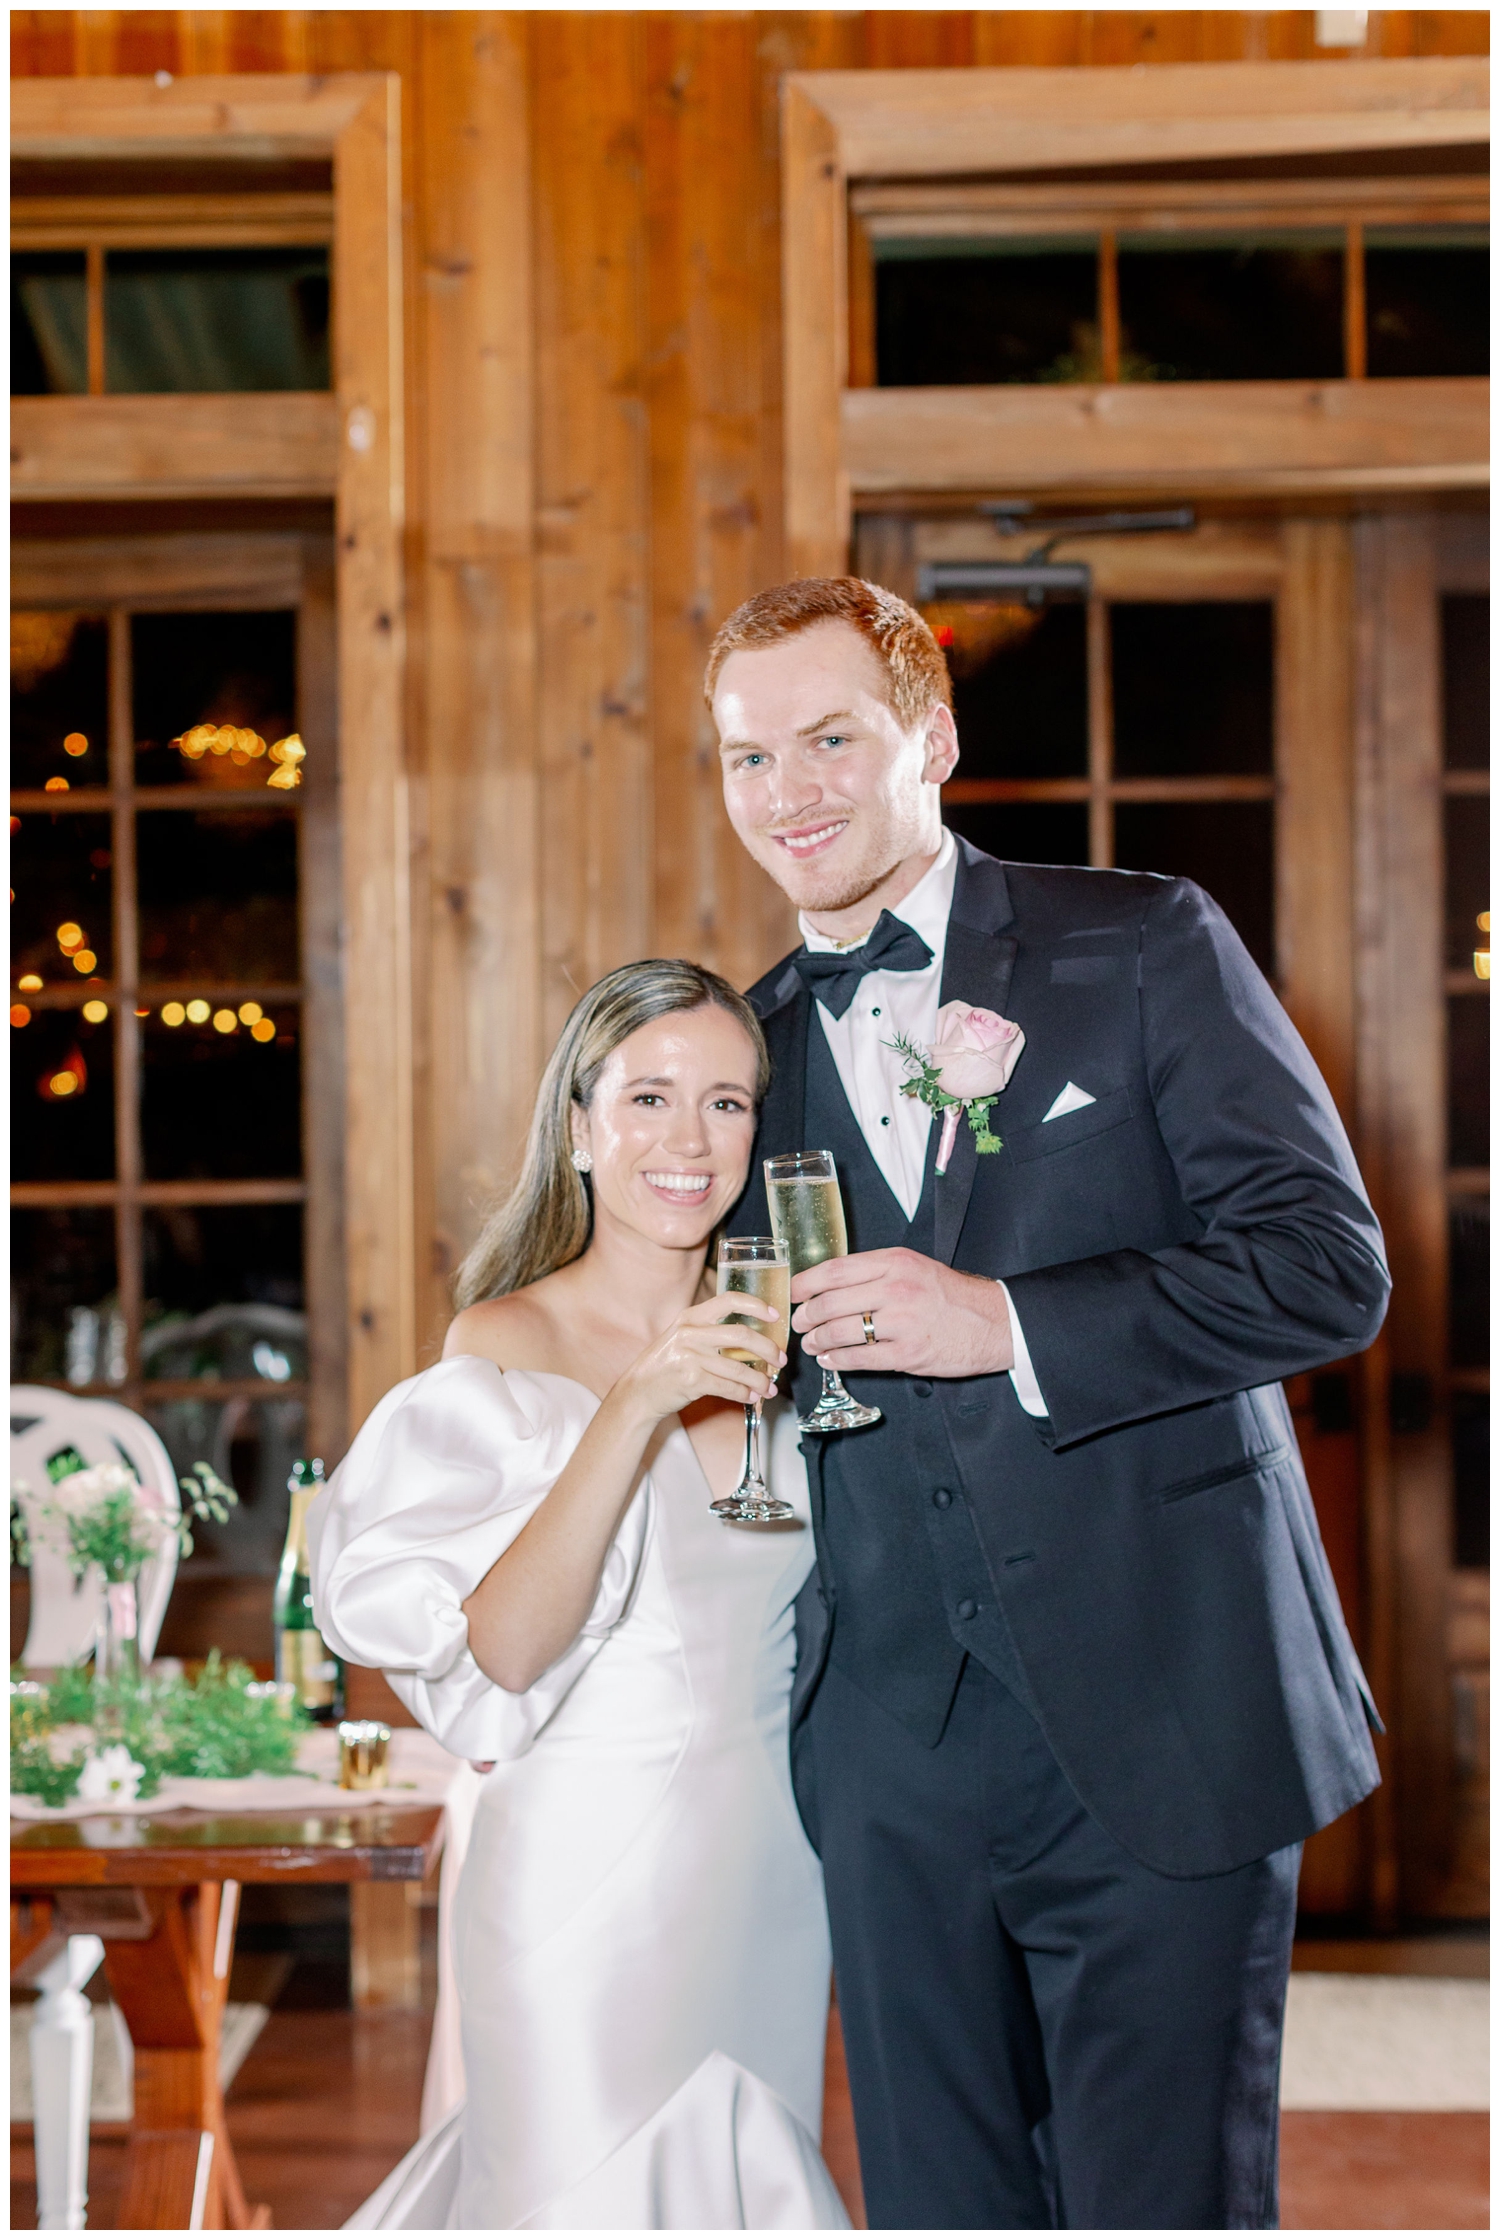 bride and groom champagne toast at reception The Carriage House Houston